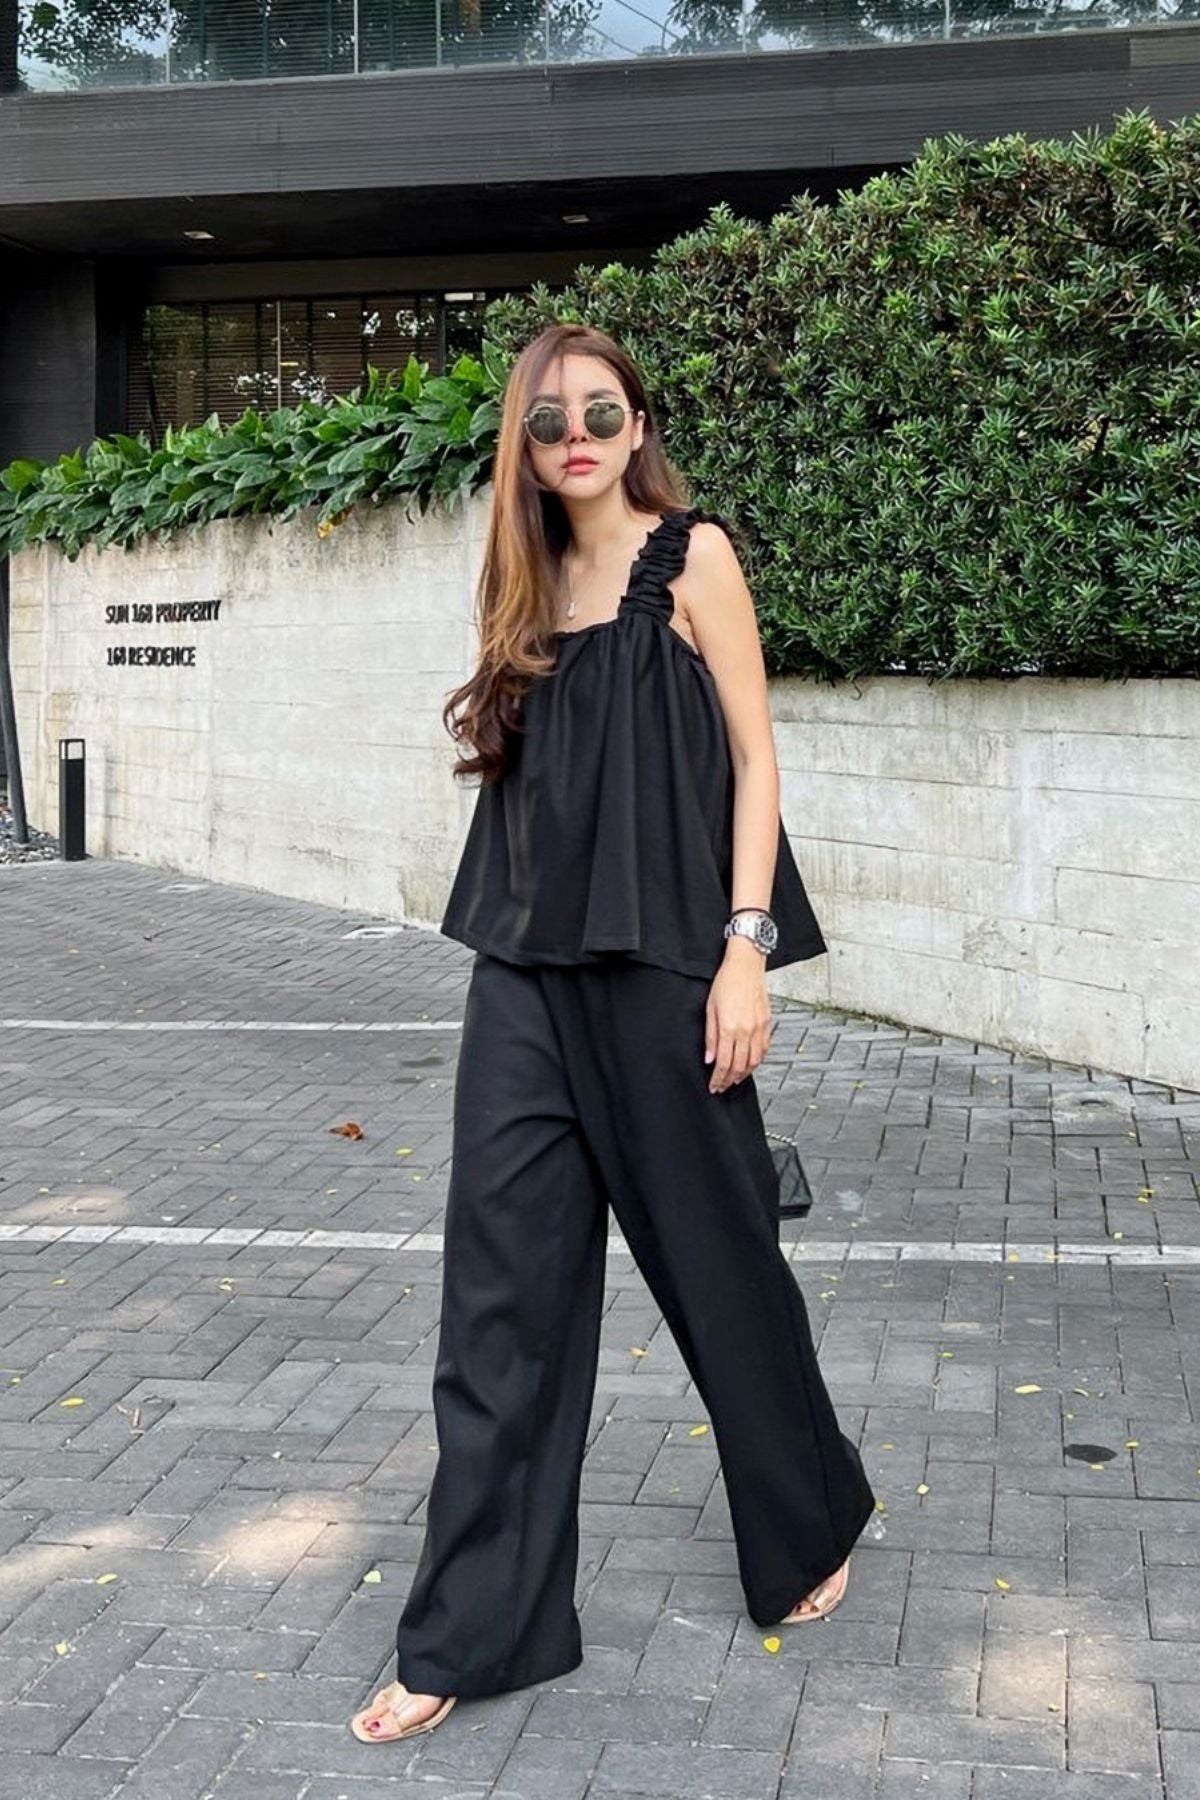 SHELBY Square-Neck Sleeveless Top & Pants Co-ord (Black)